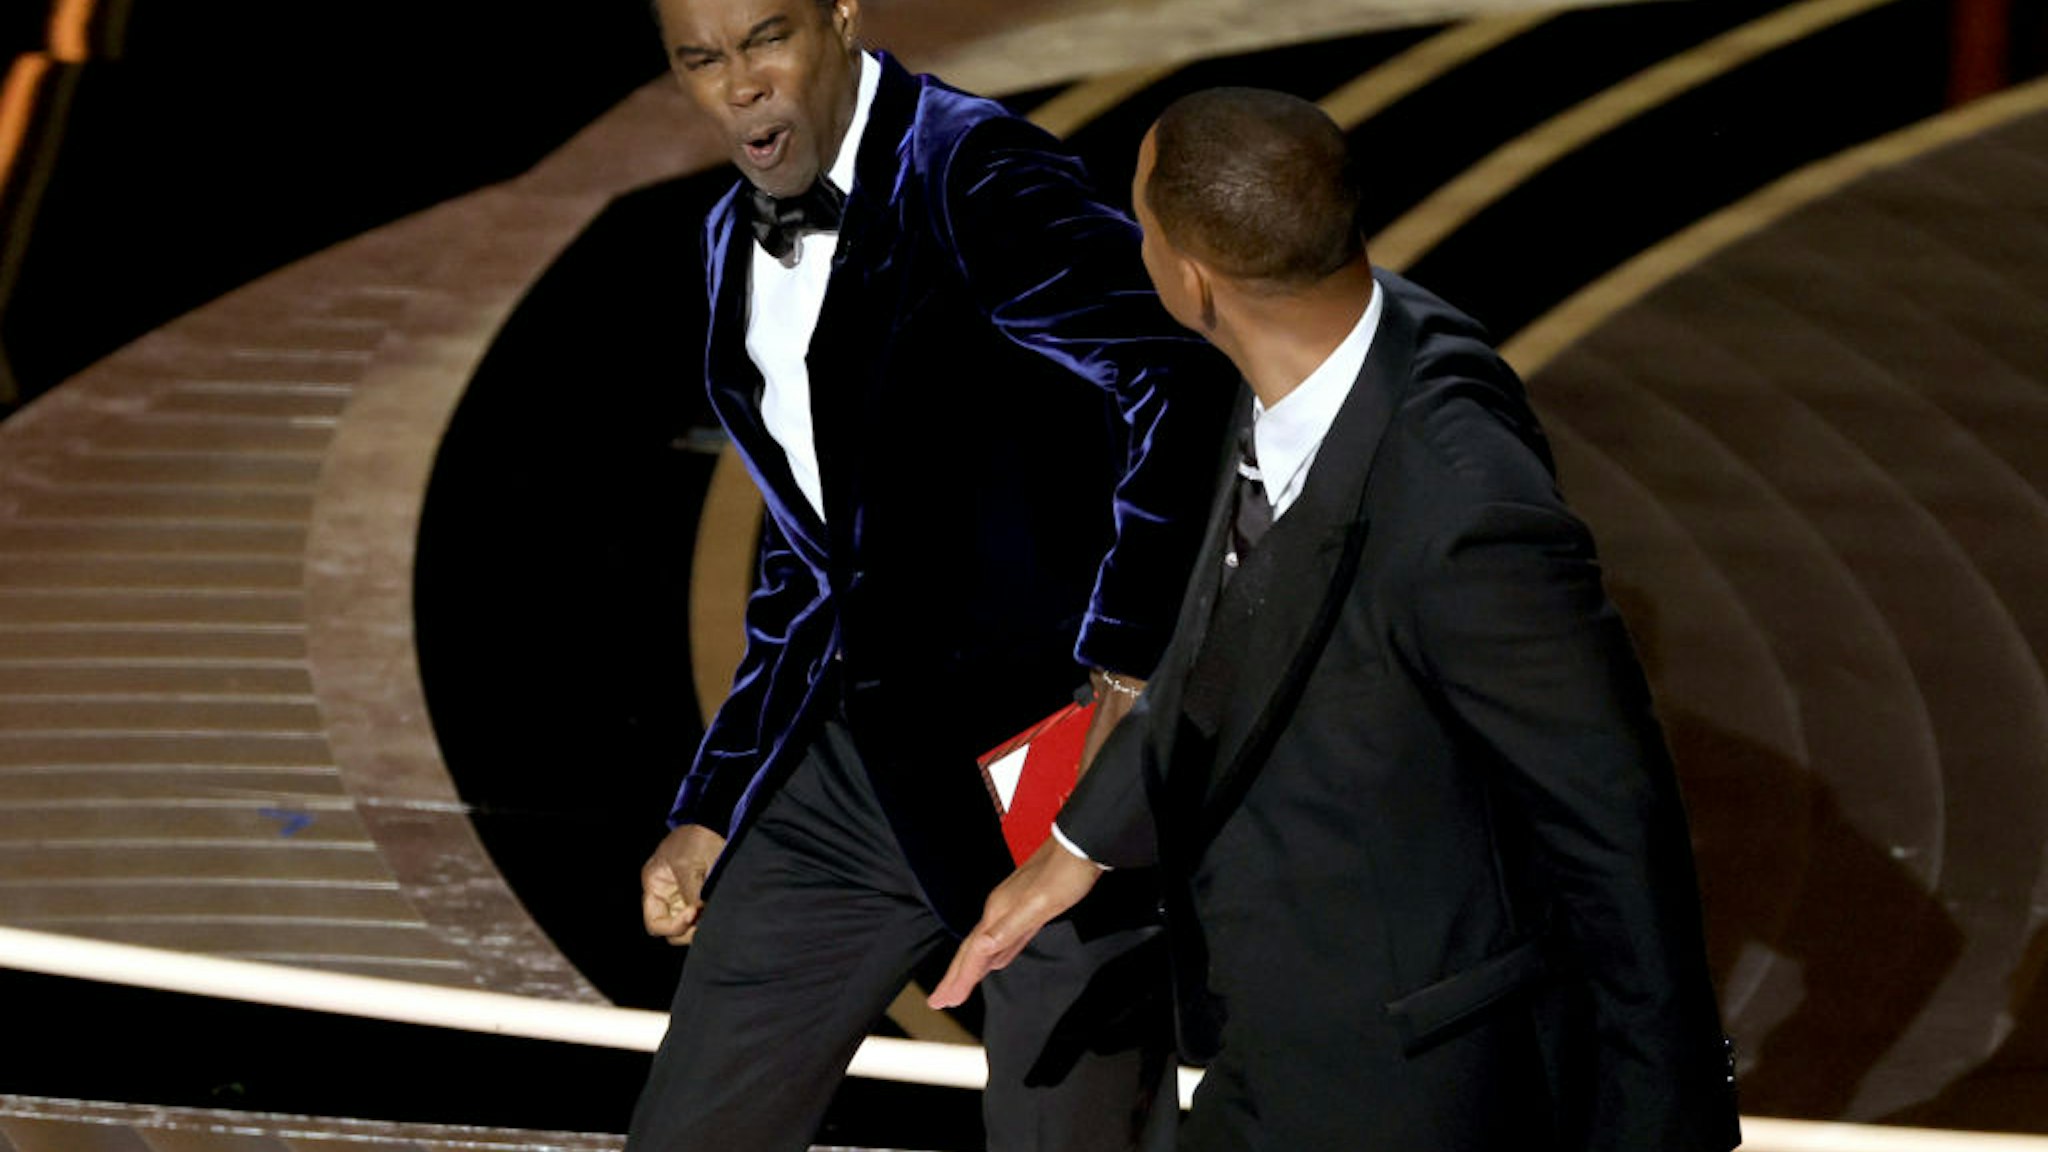 HOLLYWOOD, CALIFORNIA - MARCH 27: Will Smith appears to slap Chris Rock onstage during the 94th Annual Academy Awards at Dolby Theatre on March 27, 2022 in Hollywood, California. (Photo by Neilson Barnard/Getty Images)